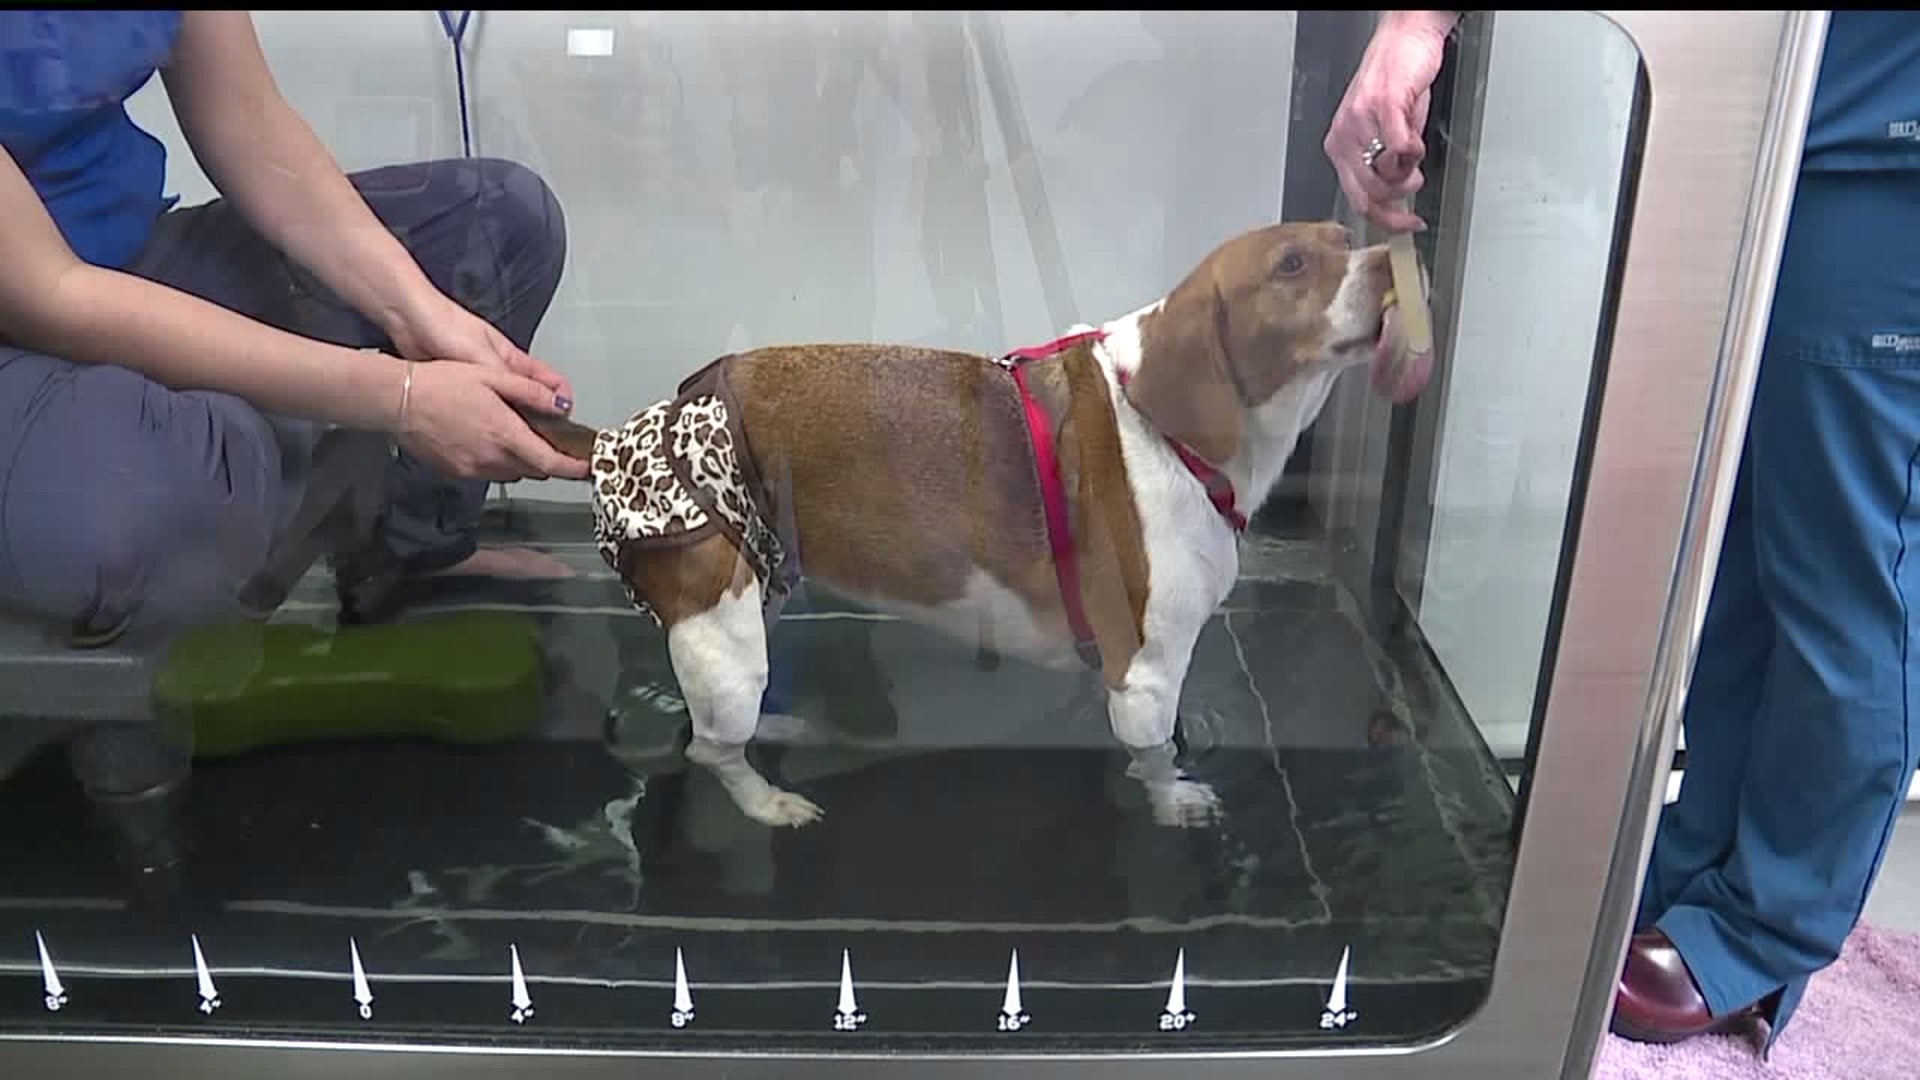 Harrisburg vet uses water therapy to help paralyzed dog learn to walk again